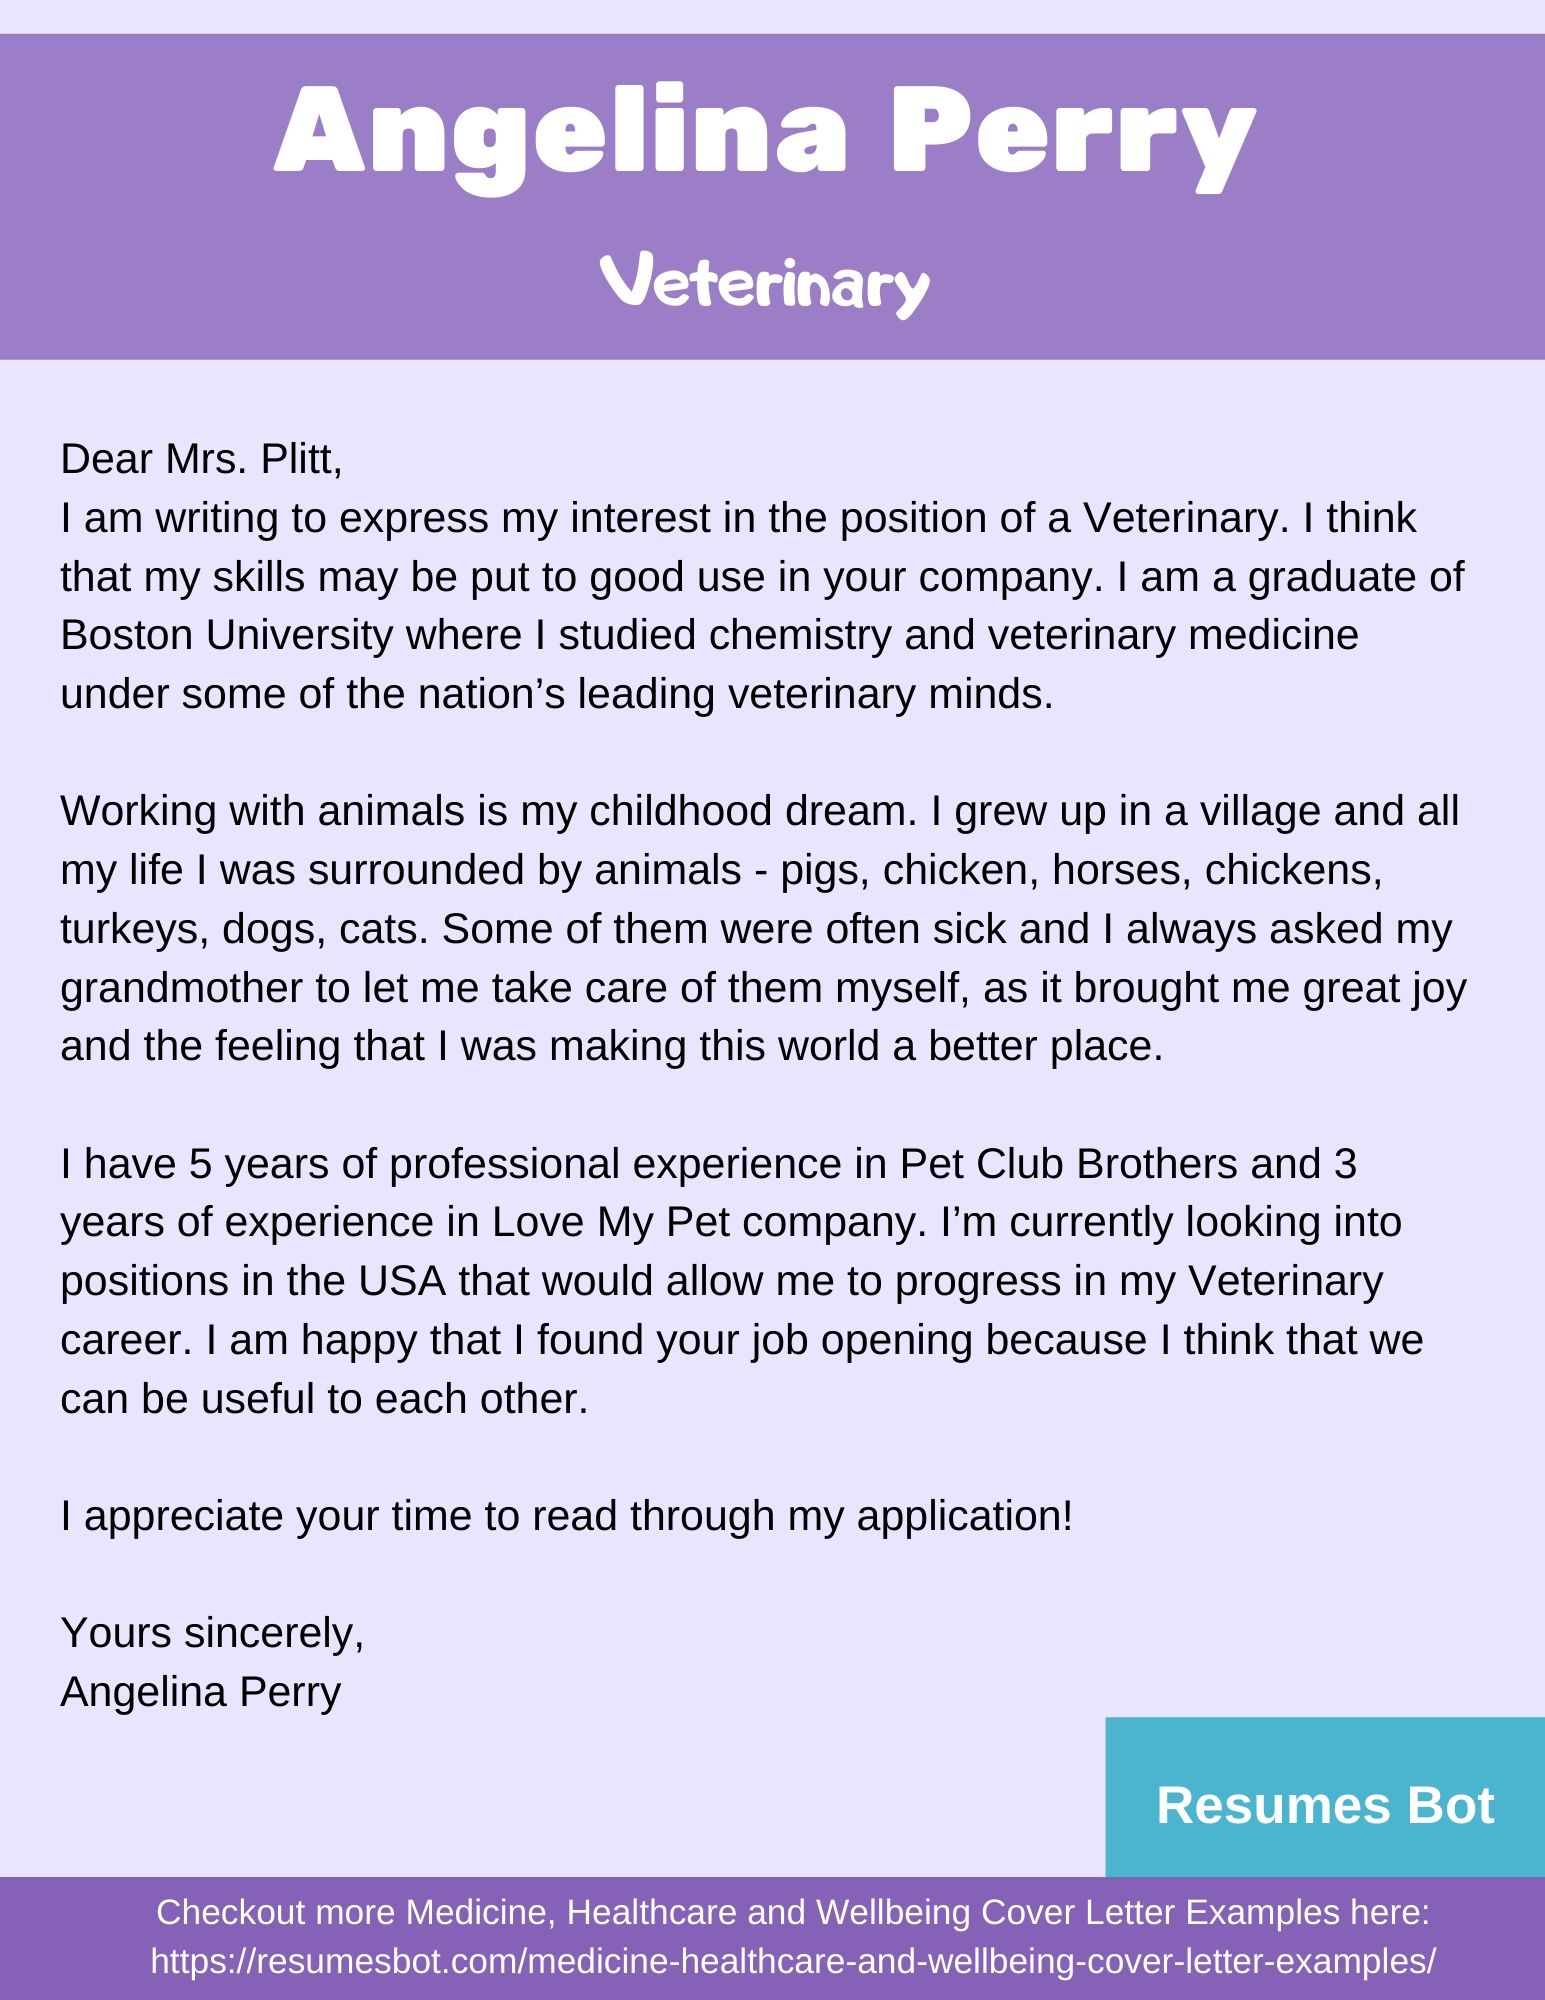 Veterinary Cover Letter Samples & Templates [PDF+Word] 2020